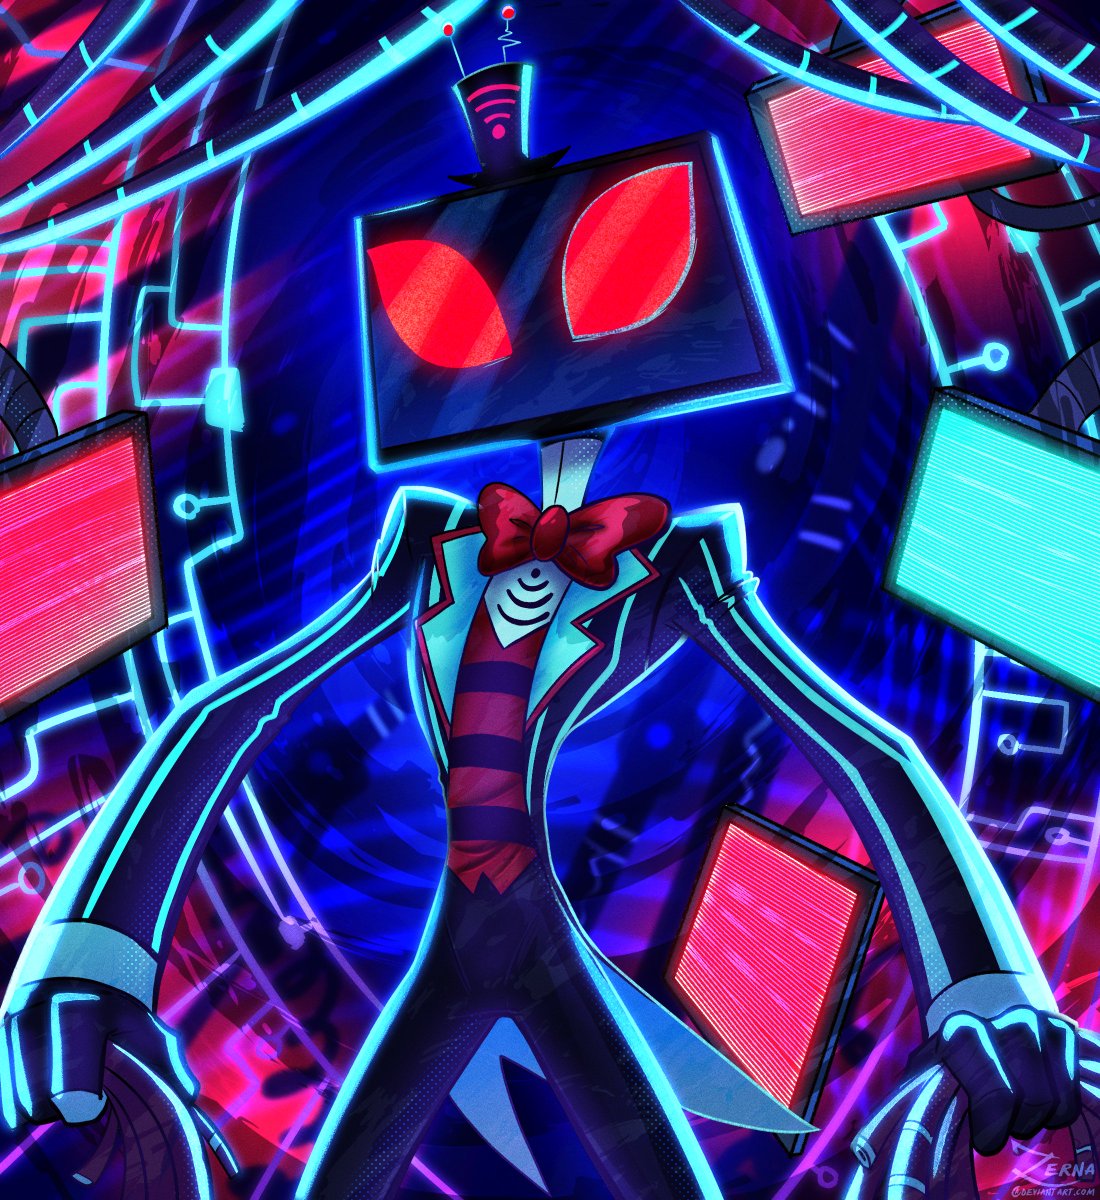 Vox is rewiring some monitors to try new strategies to spy on Alastor, naturally.
Fun piece to color up before covid really hit me after Lvl Up Expo, this week =w=;
#Hazbinhotel